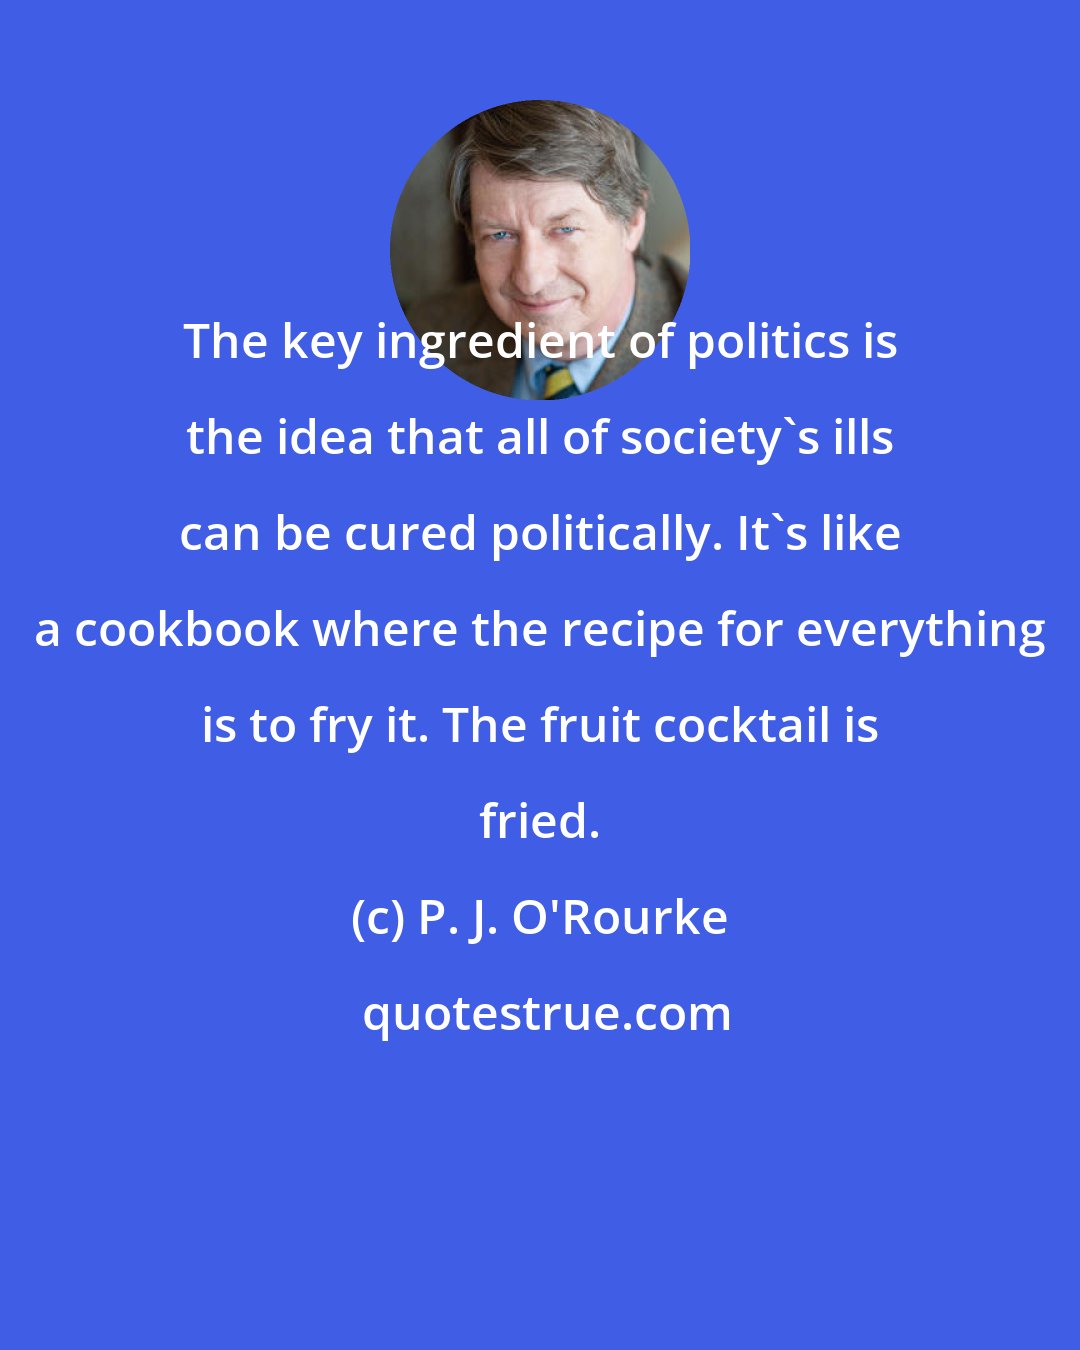 P. J. O'Rourke: The key ingredient of politics is the idea that all of society's ills can be cured politically. It's like a cookbook where the recipe for everything is to fry it. The fruit cocktail is fried.